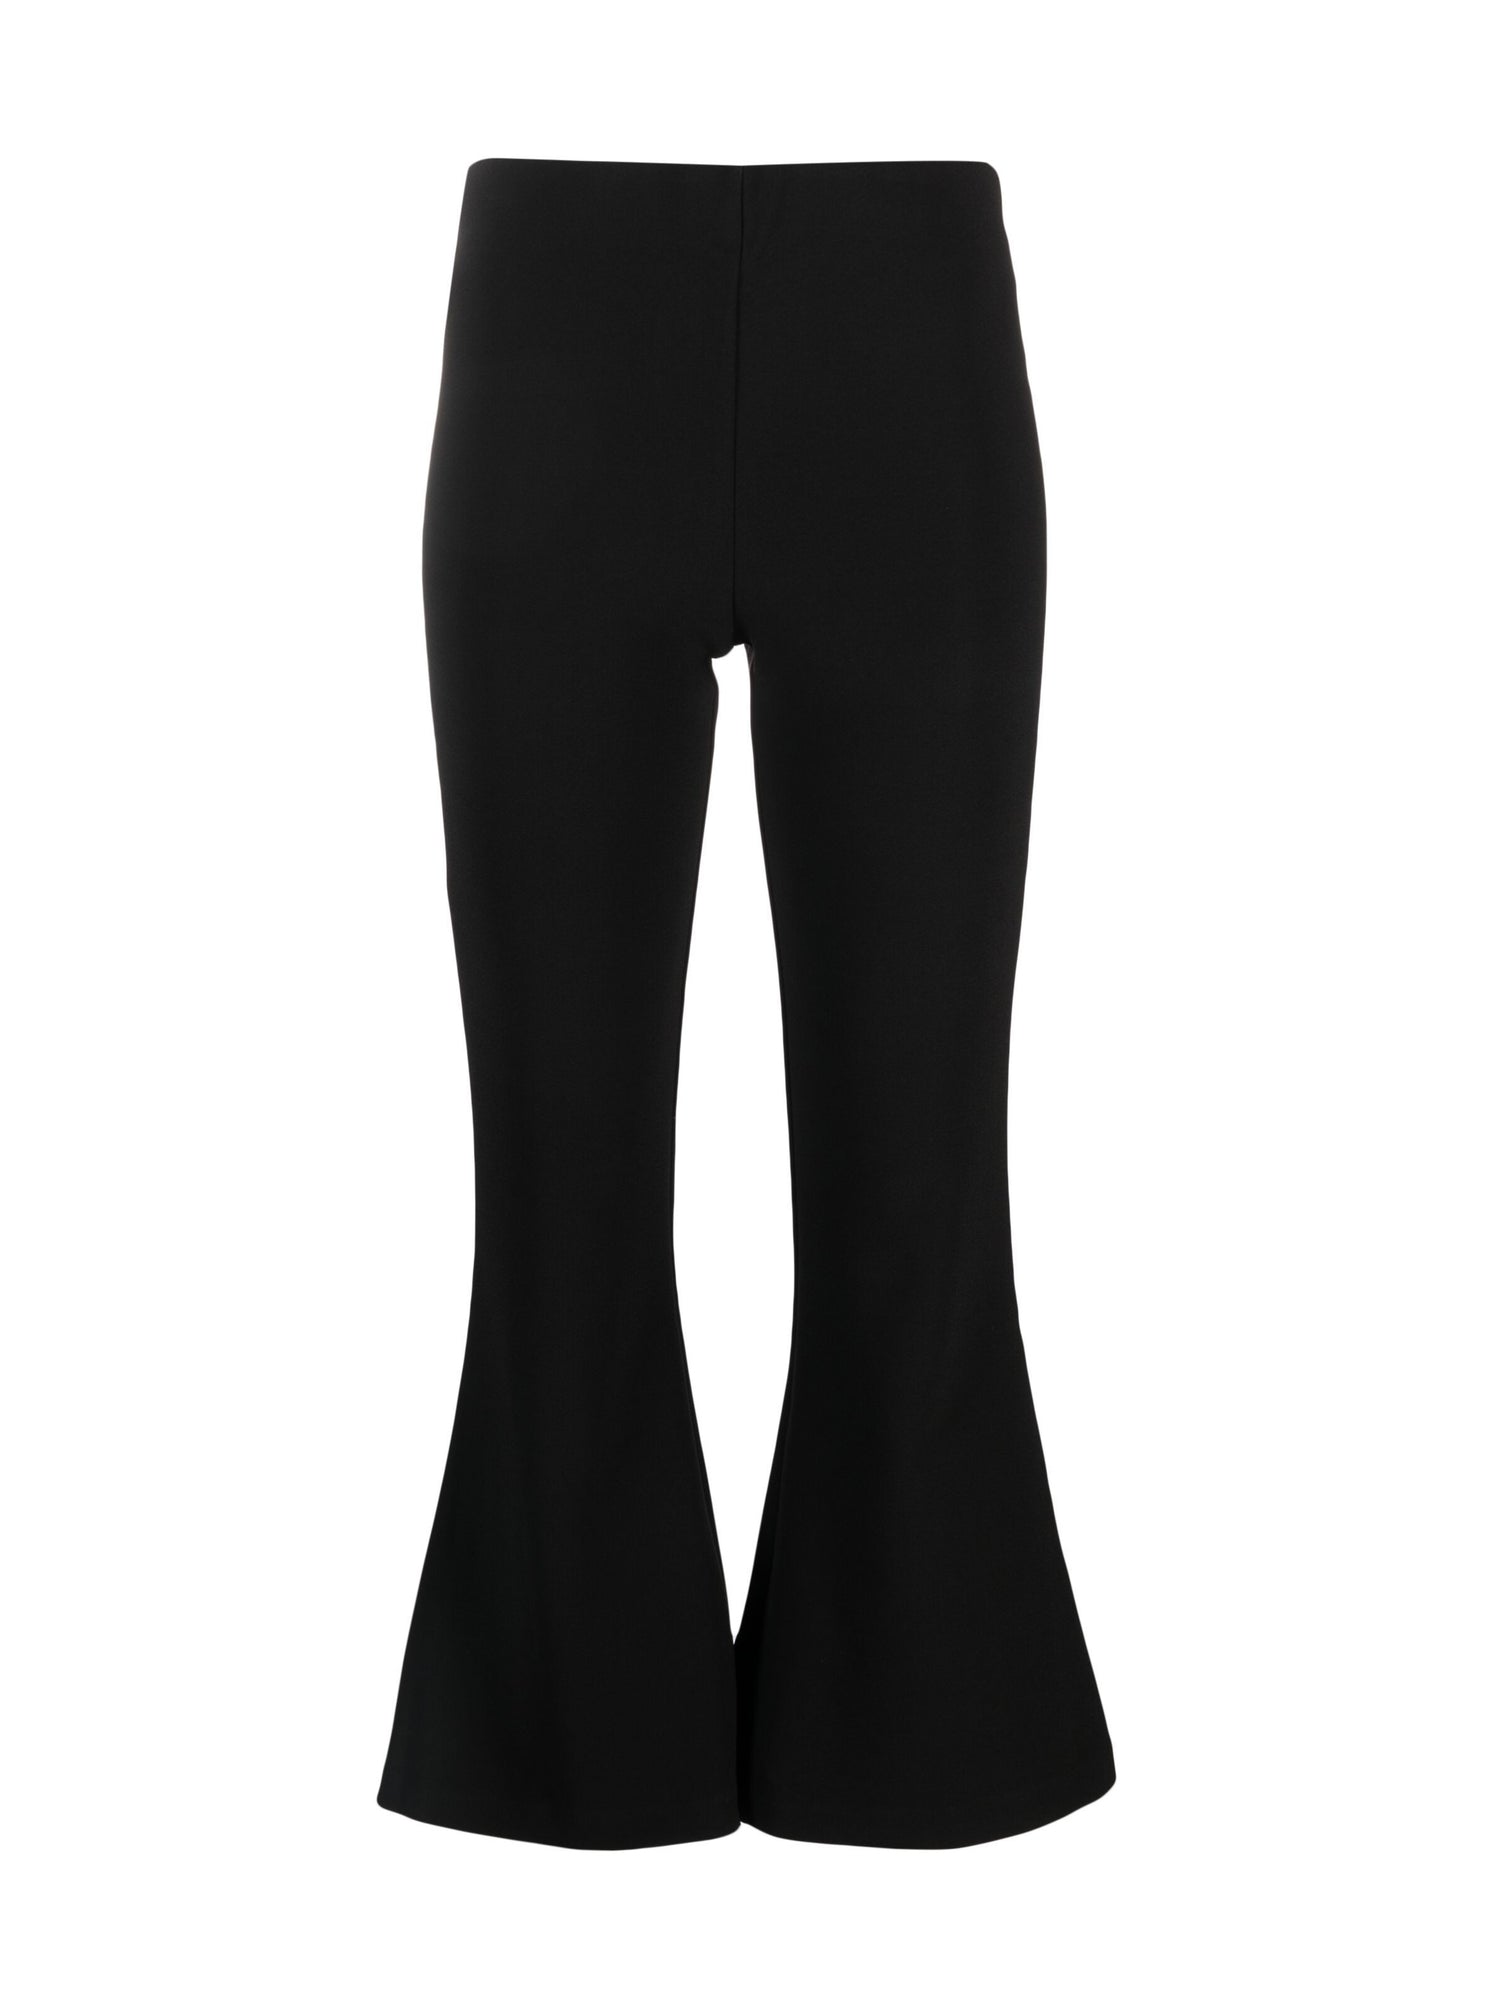 VILANNA cropped flared trousers, black